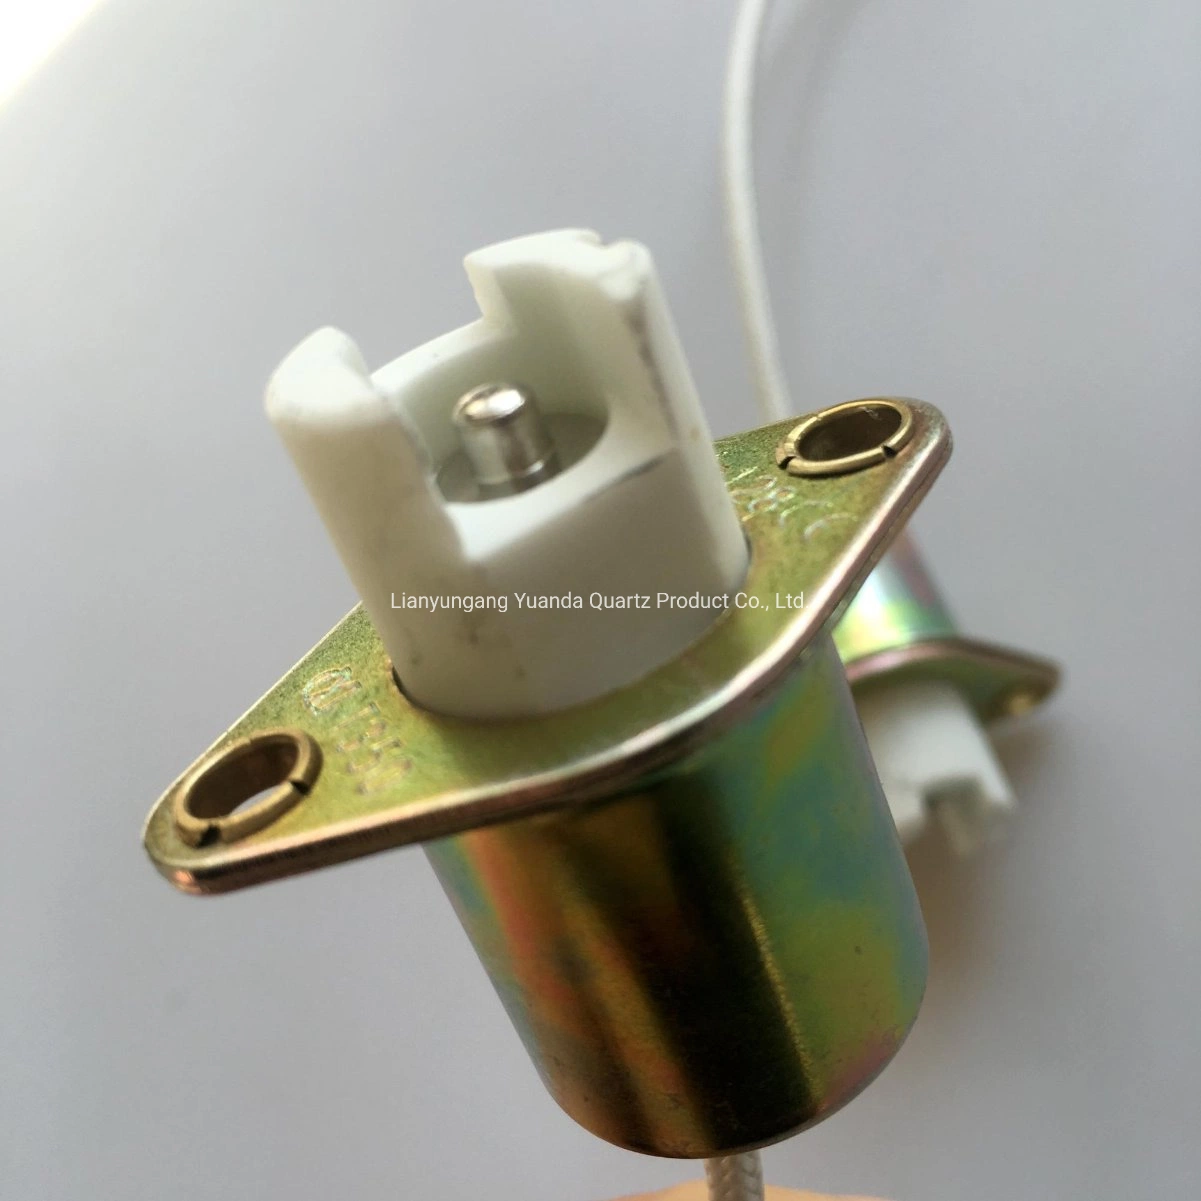 R7s Lamp Holder for Halogen Lamp R7s Lamp Holder with The Wire